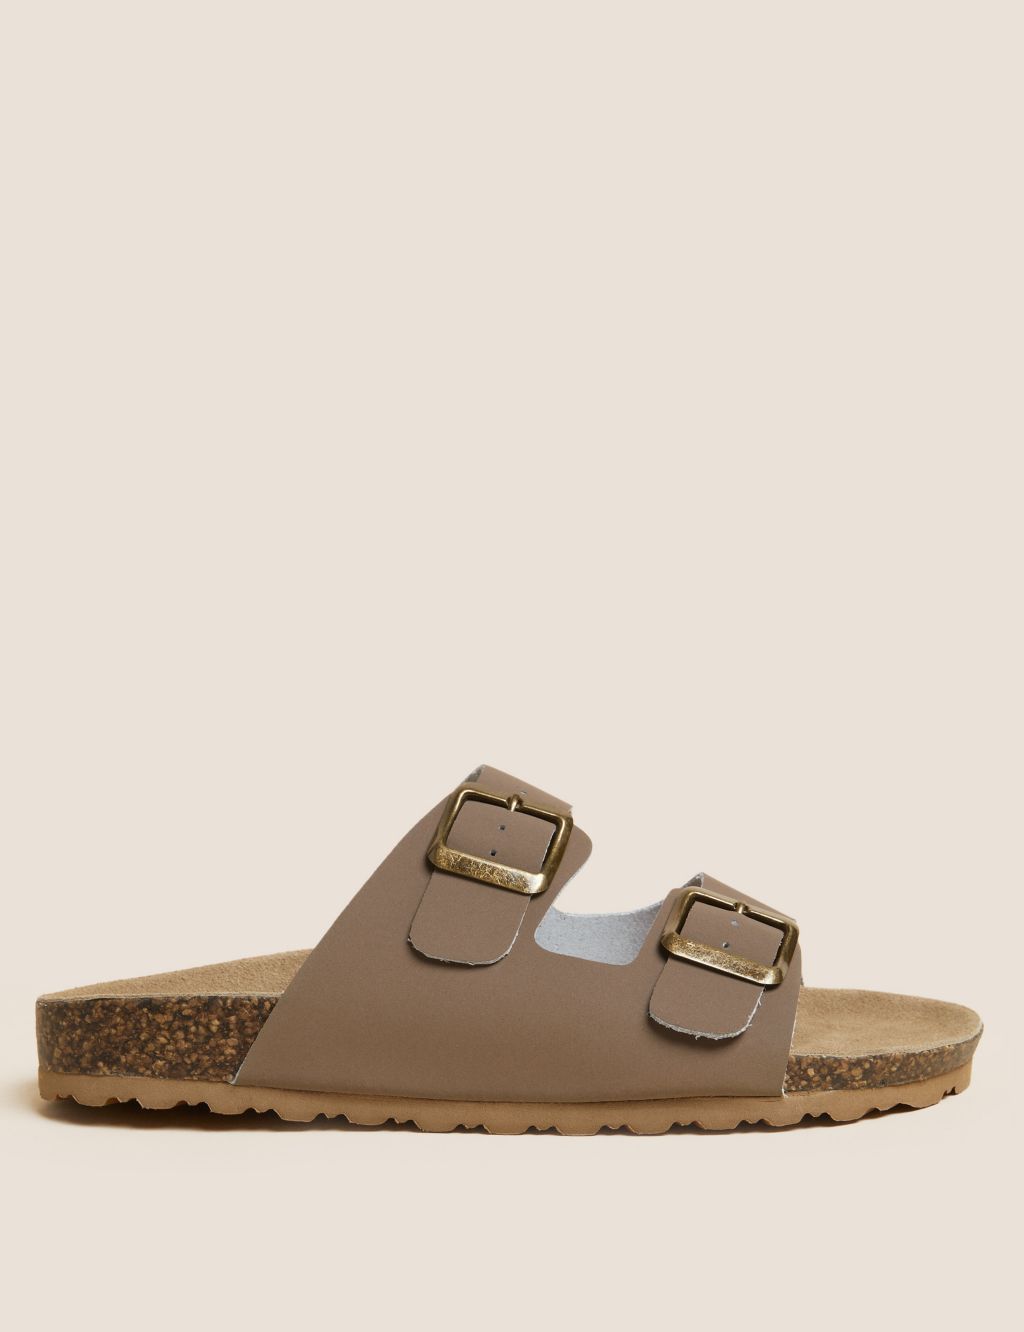 Leather Footbed Sandals image 1